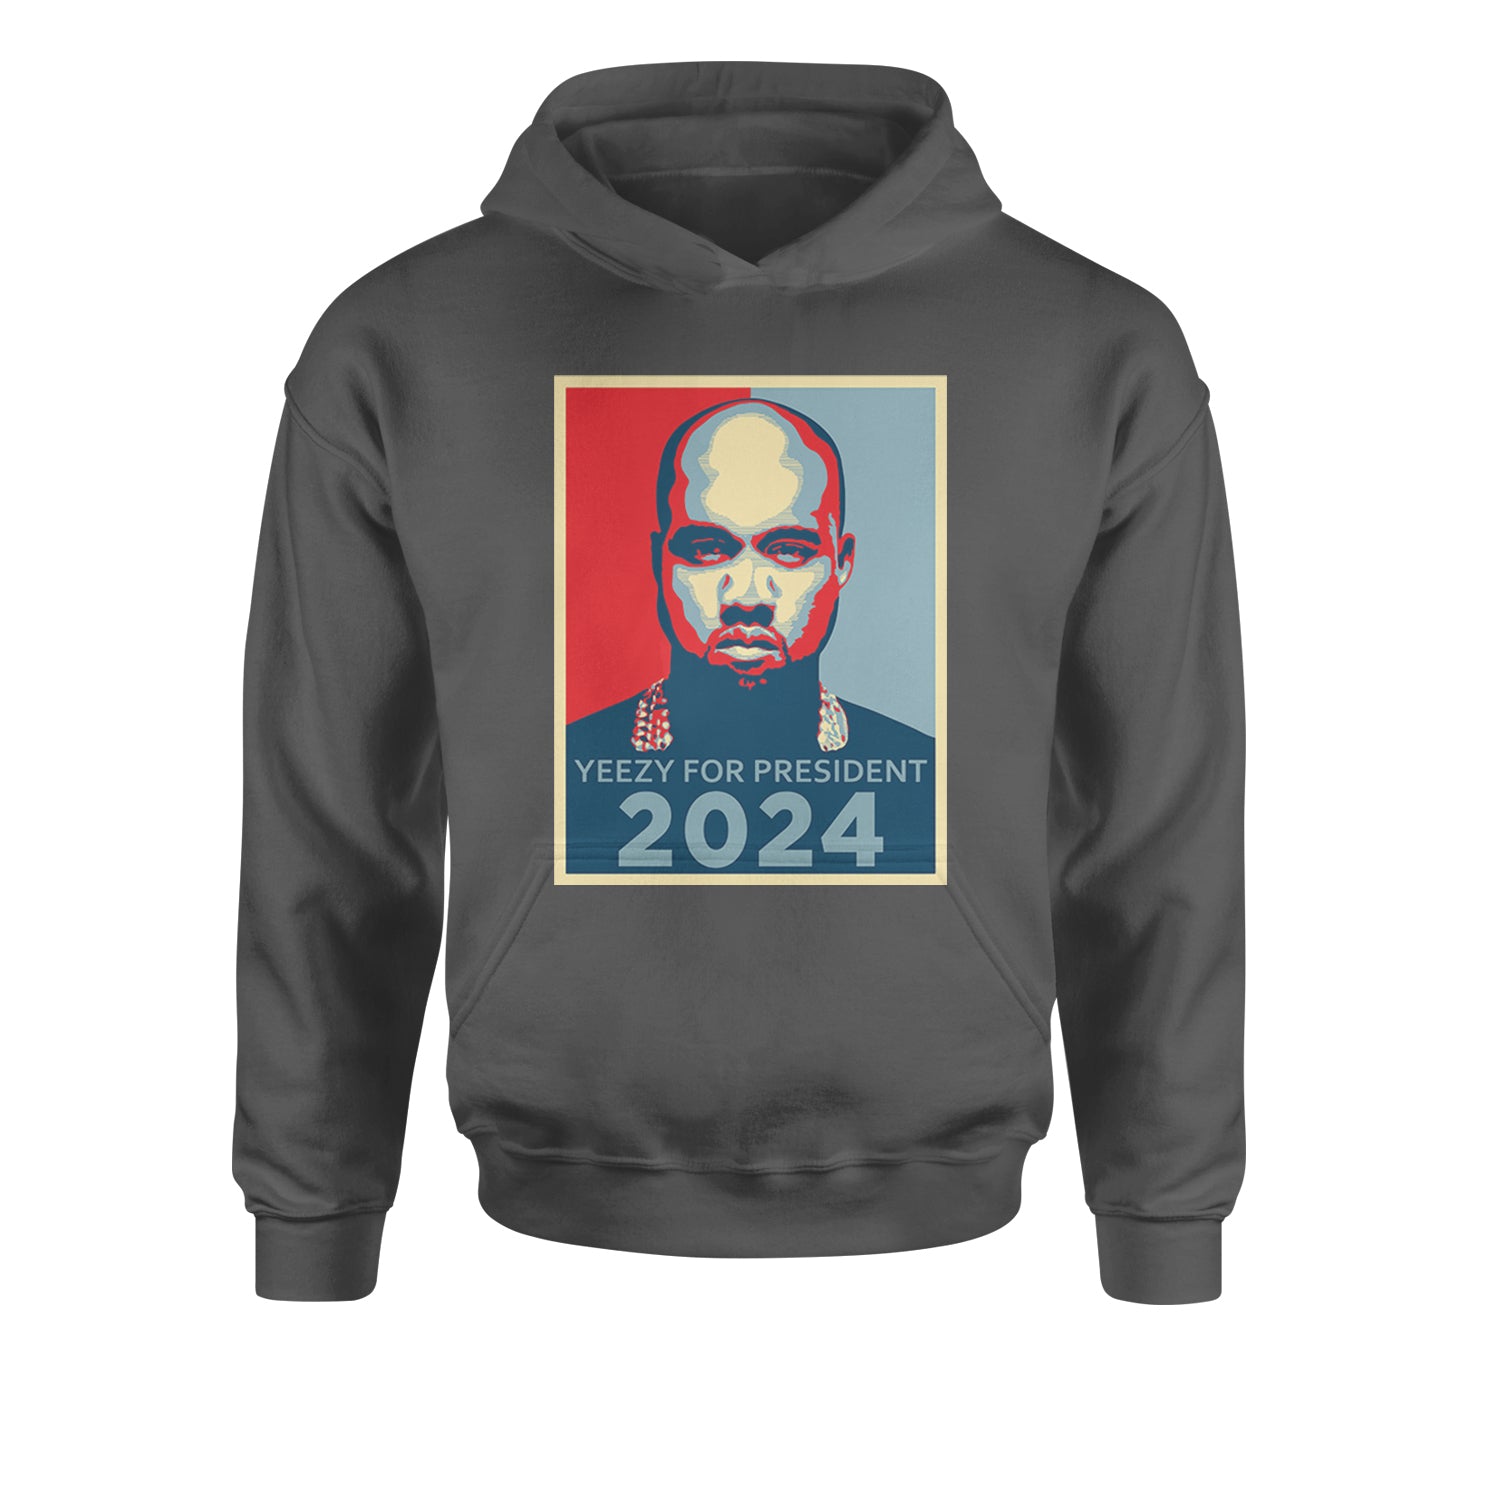 Yeezus For President Vote for Ye Youth-Sized Hoodie Charcoal Grey